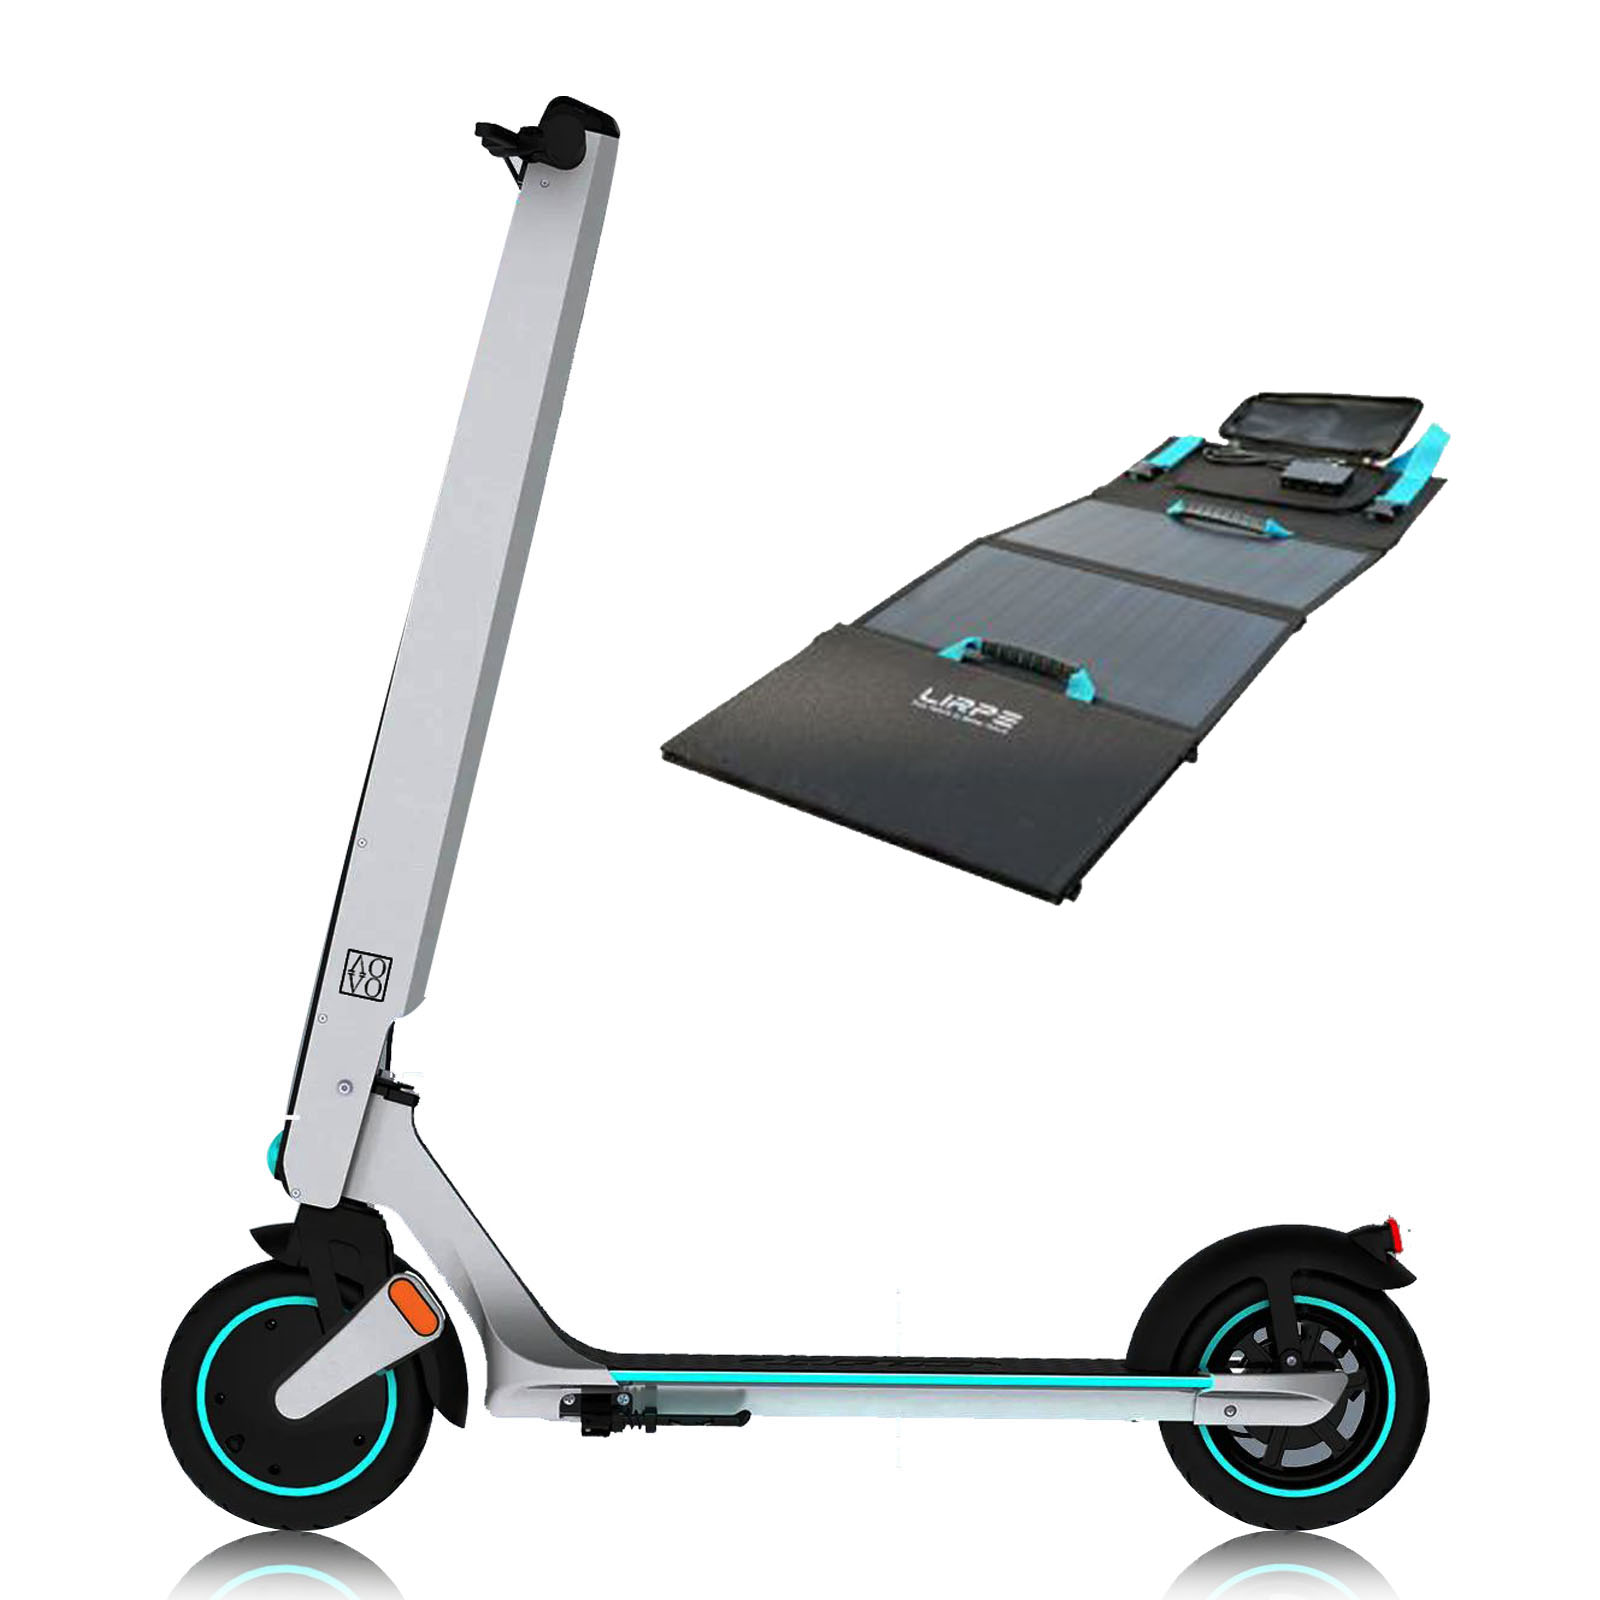 AOVO®Lirpe R1 promax, First solar electric scooter in the world